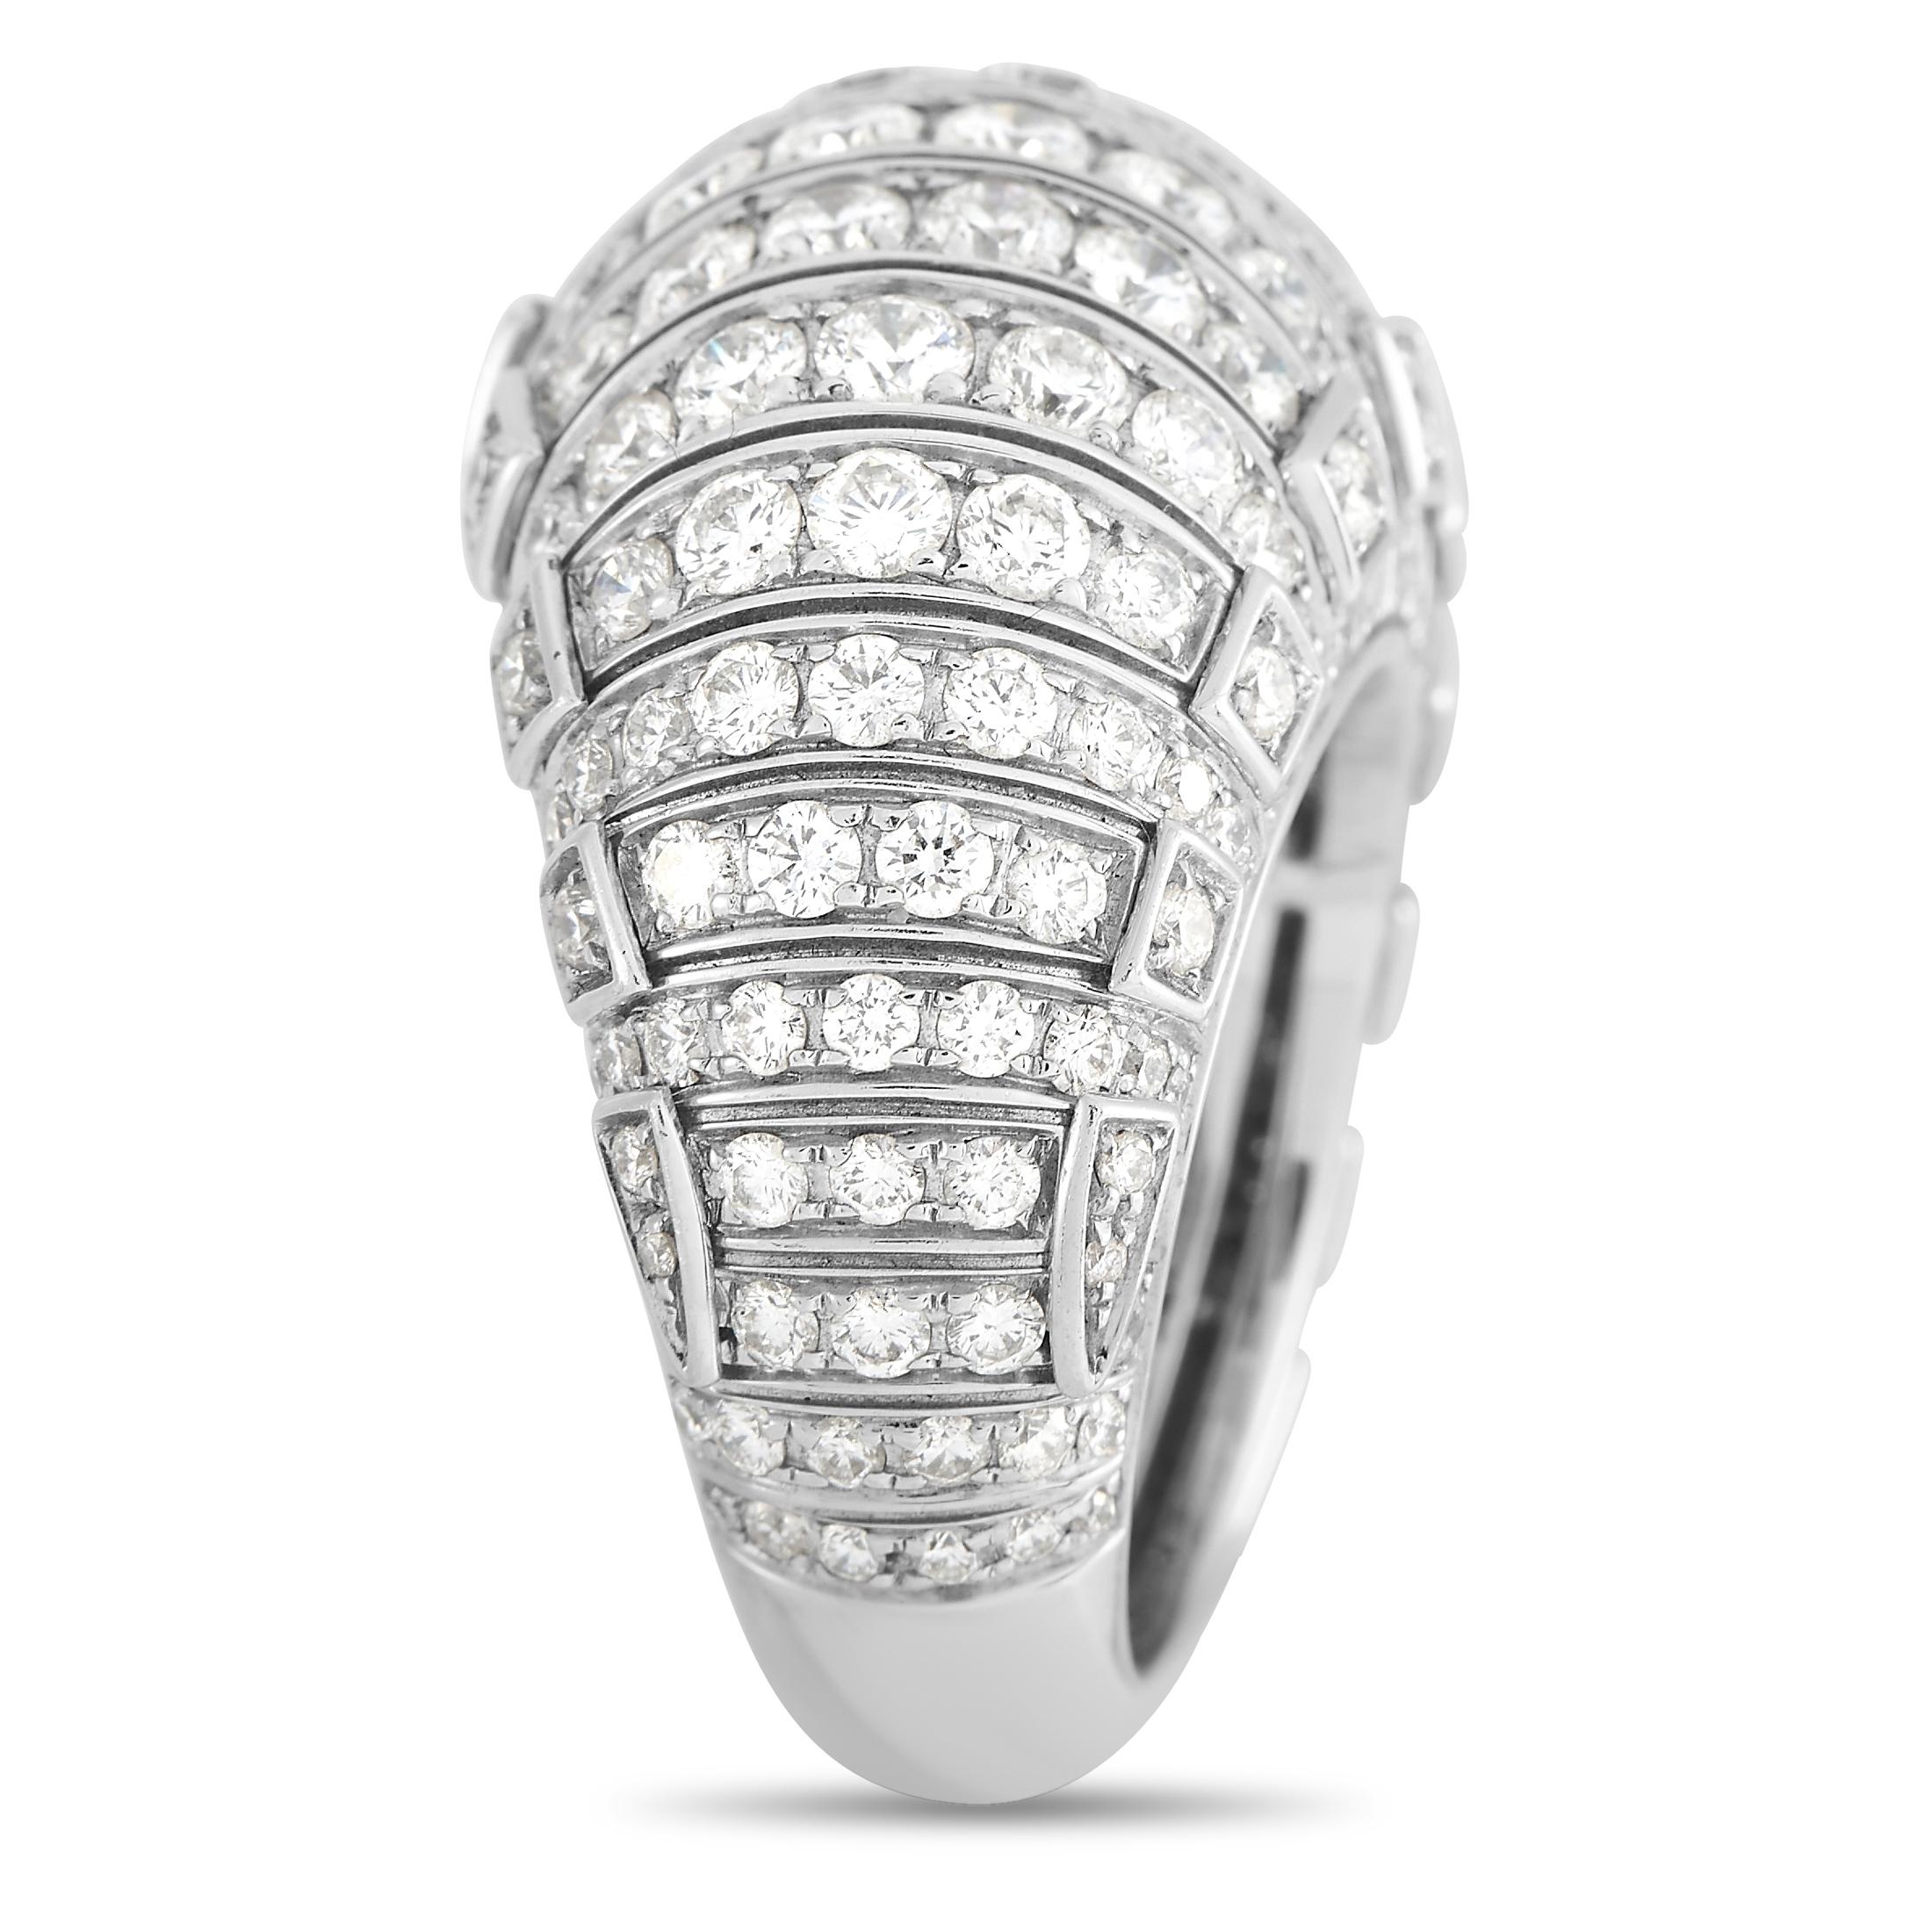 Bold and eye-catching, this ring will forever make a statement. The rounded 18K White Gold setting features a 4mm wide band and a 10mm top height. It also comes to life thanks to a glittering arrangement of diamonds with a total weight of 7.30